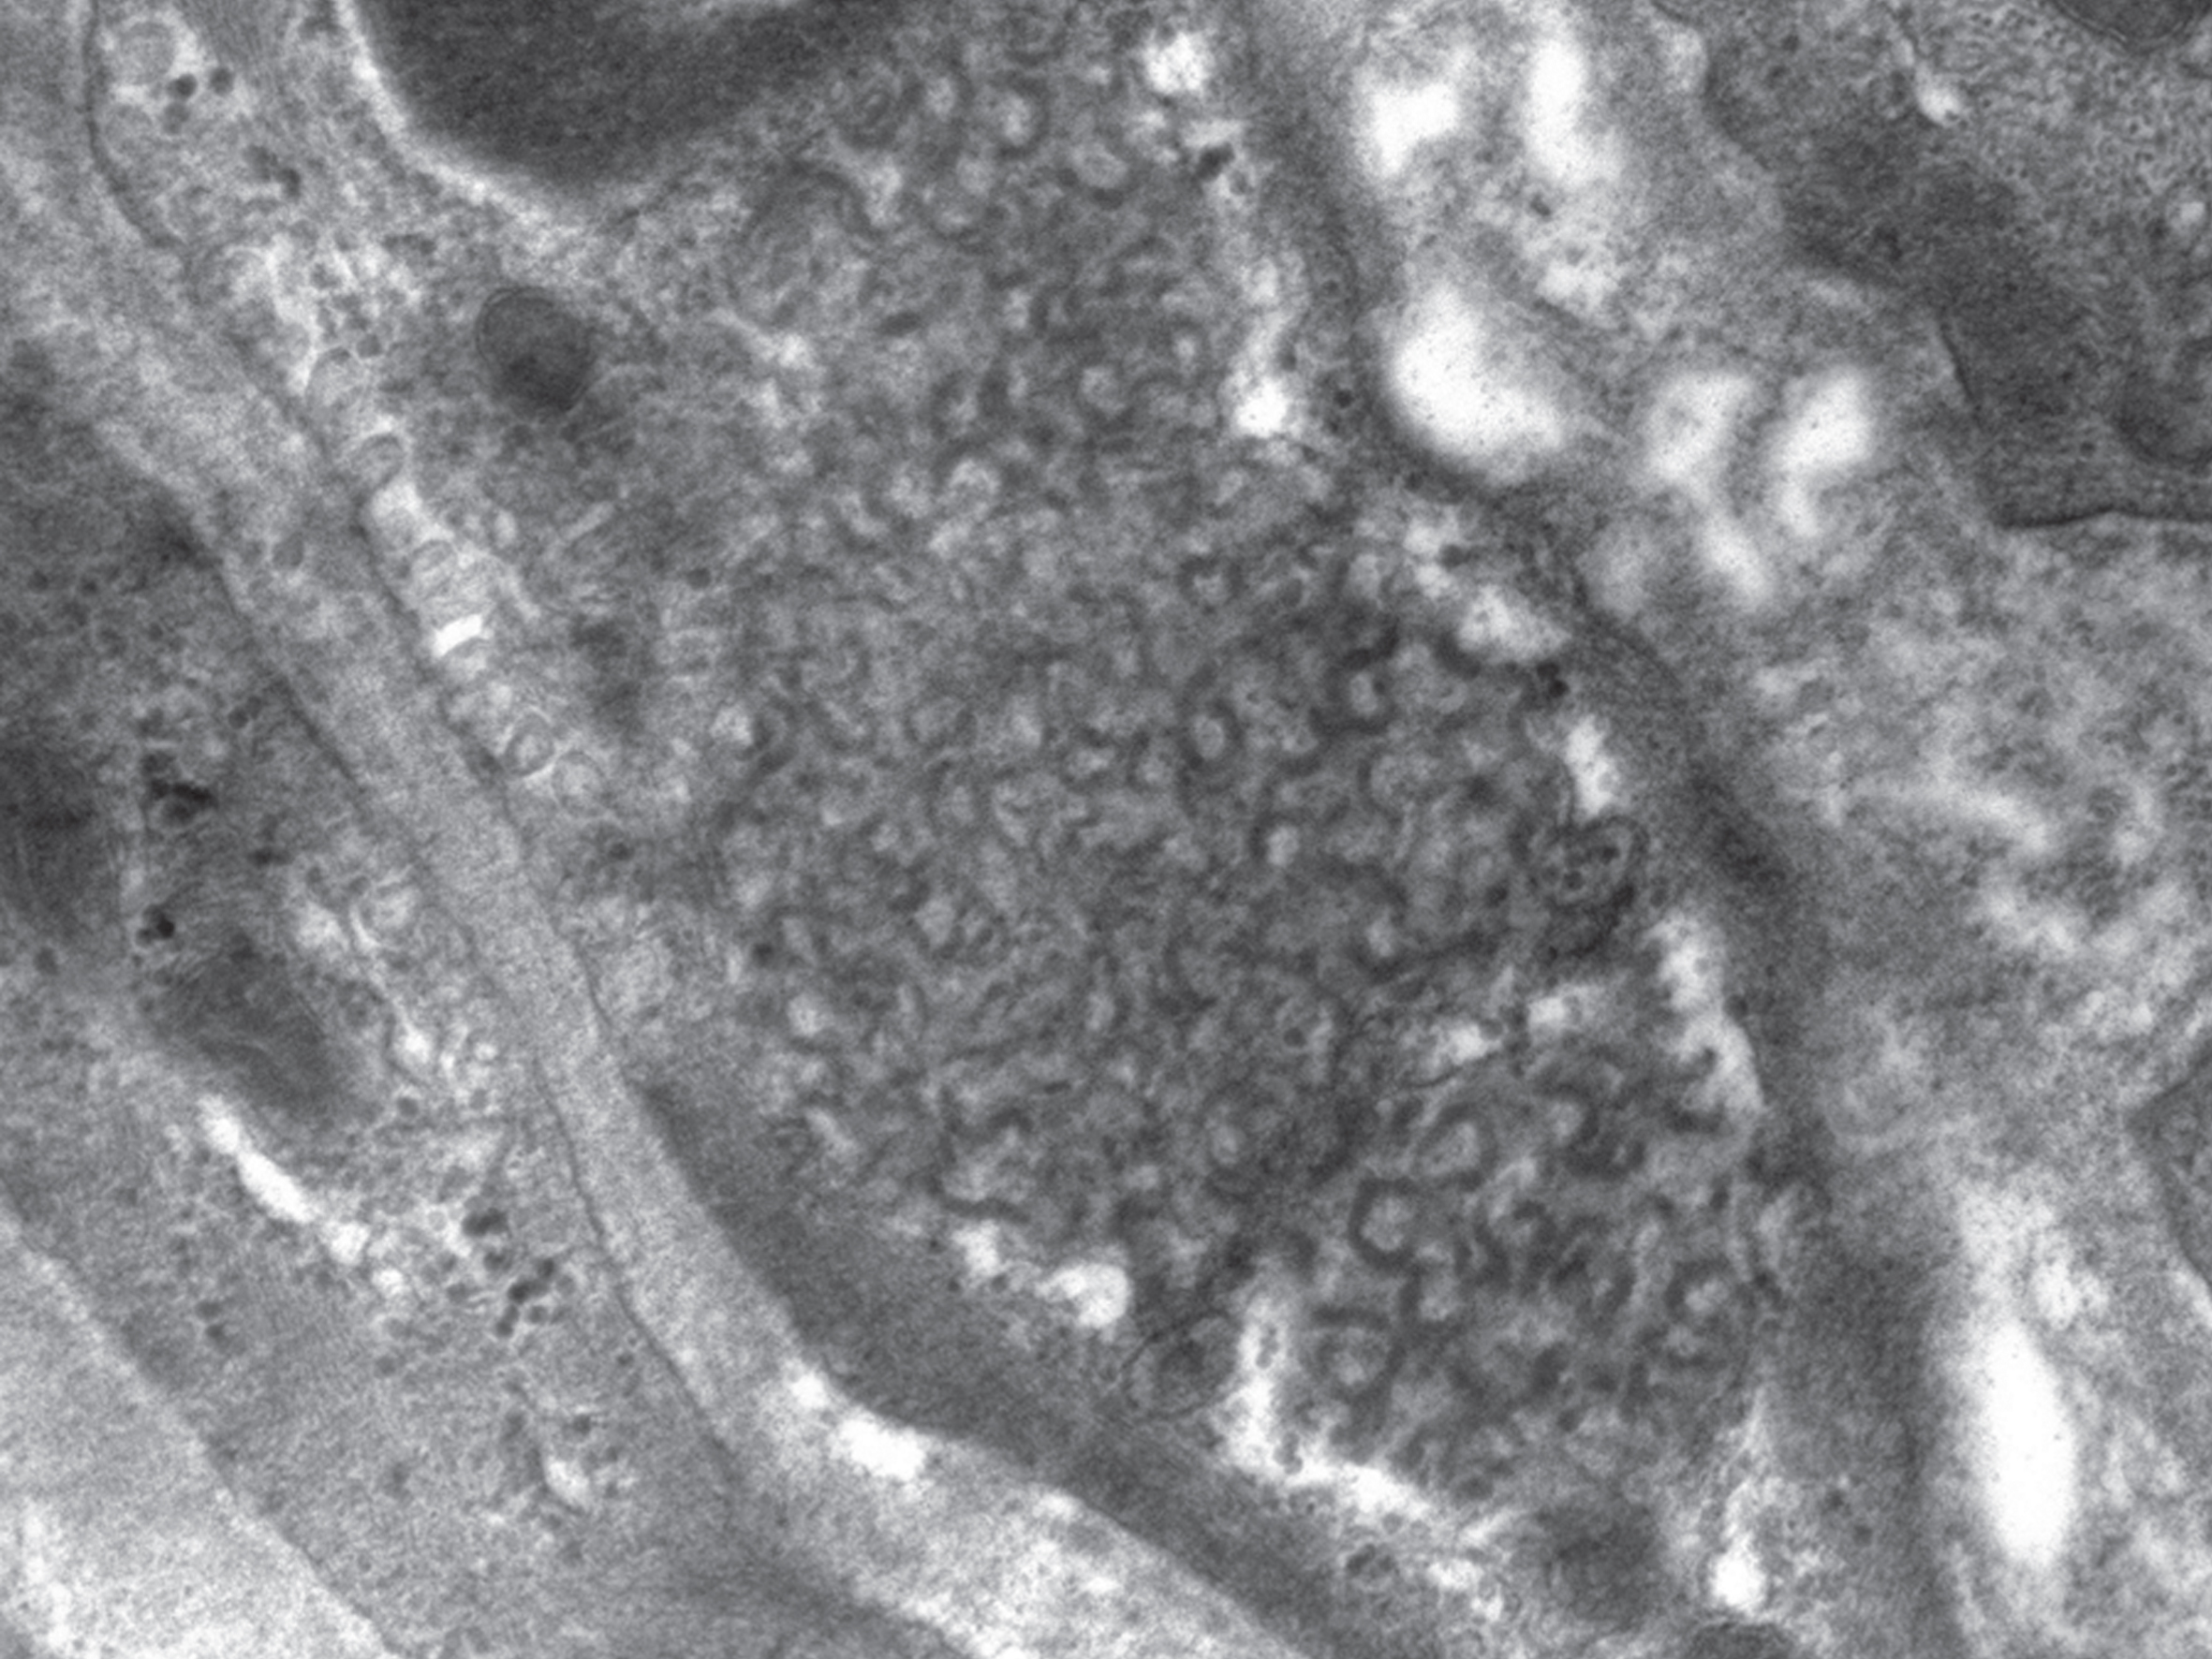 Curvilinear profiles (CLPs) in an endothelial cell. 20,000x magnification.